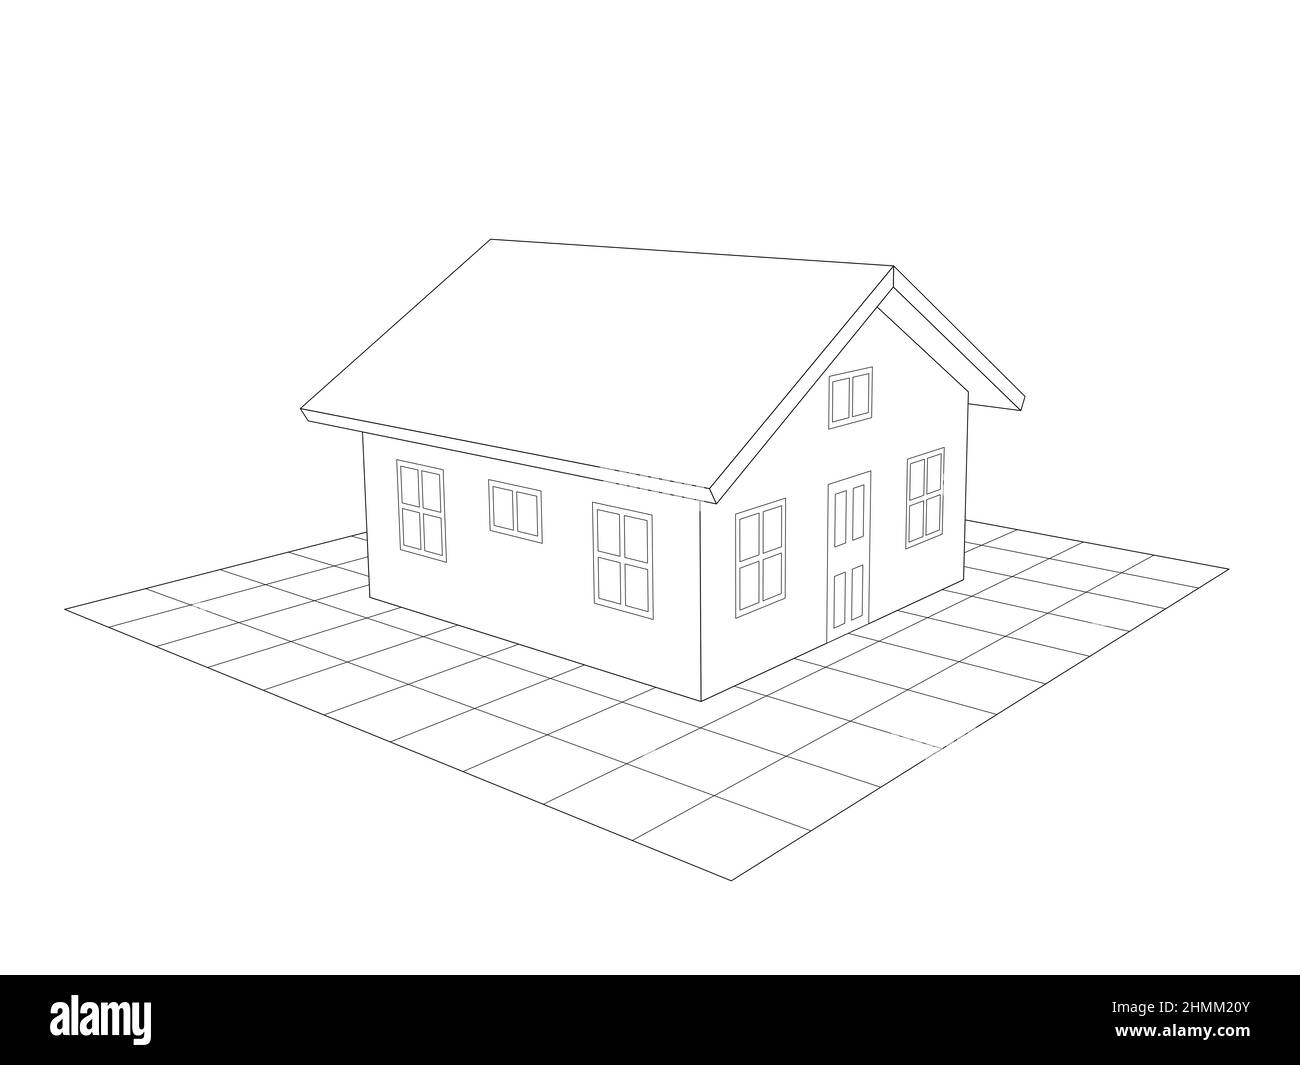 simple design perspective drawing of a single storey house. black lines illustration Stock Photo